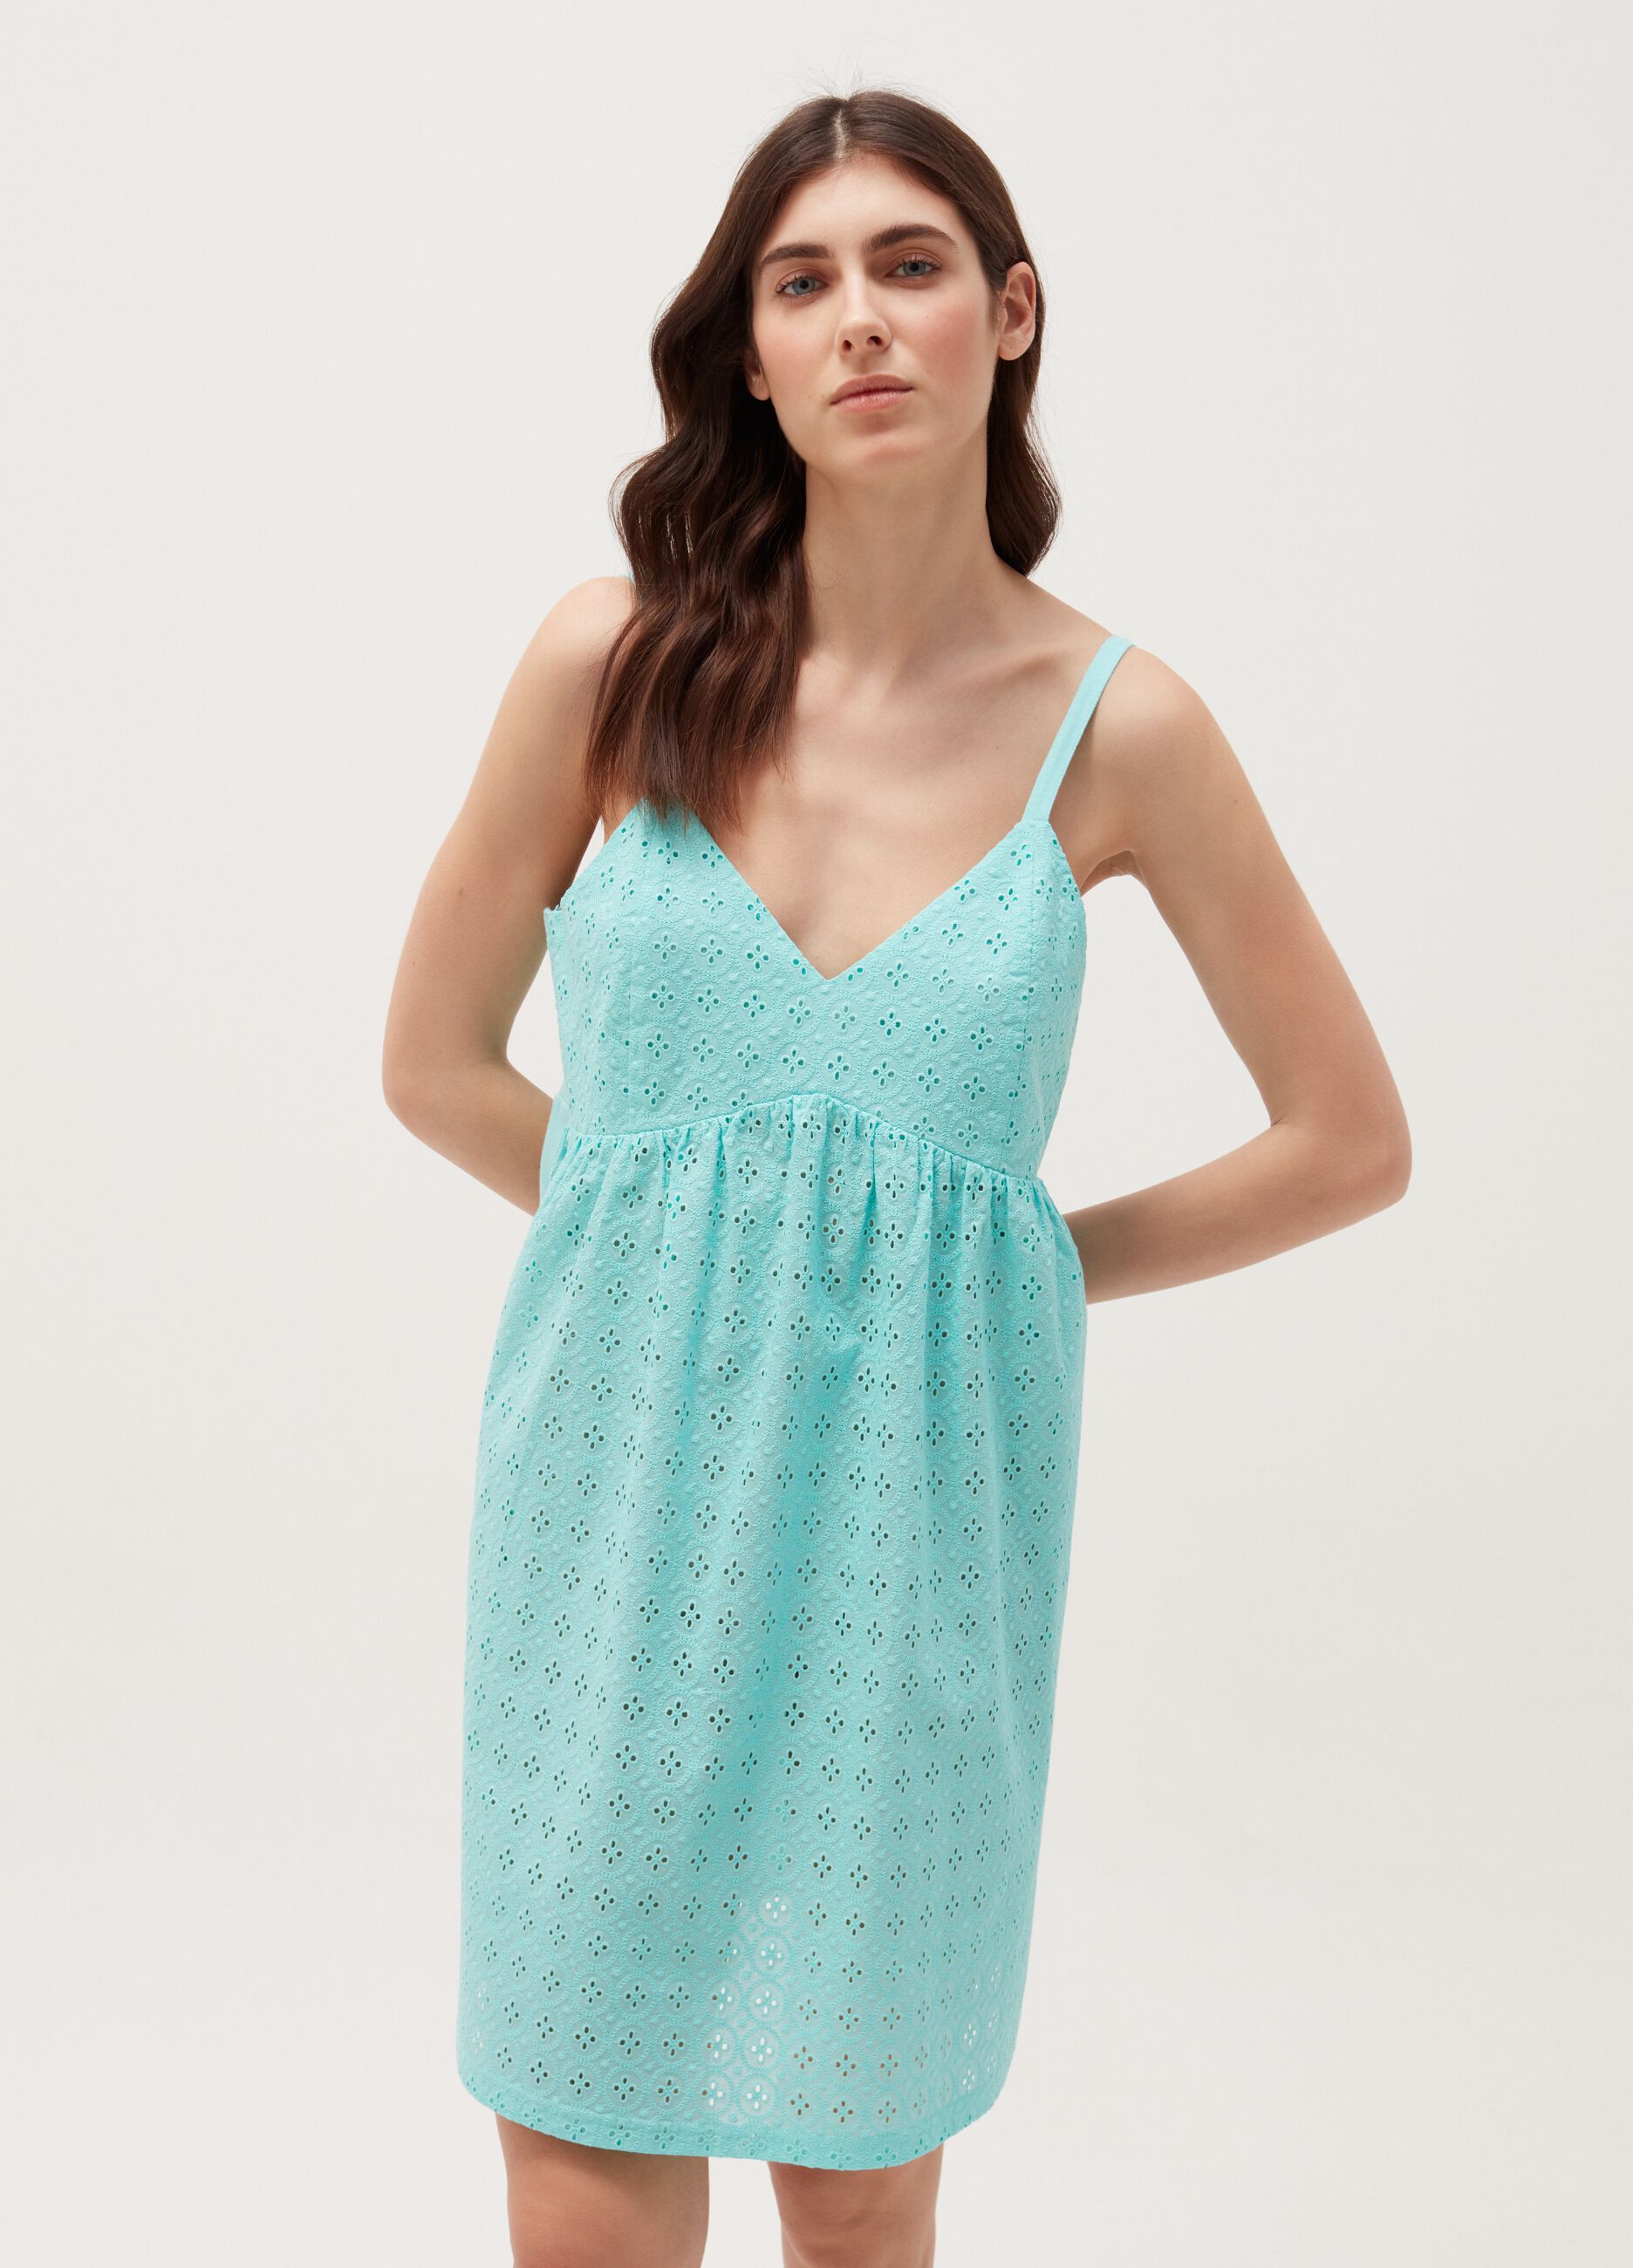 Broderie anglaise nightdress